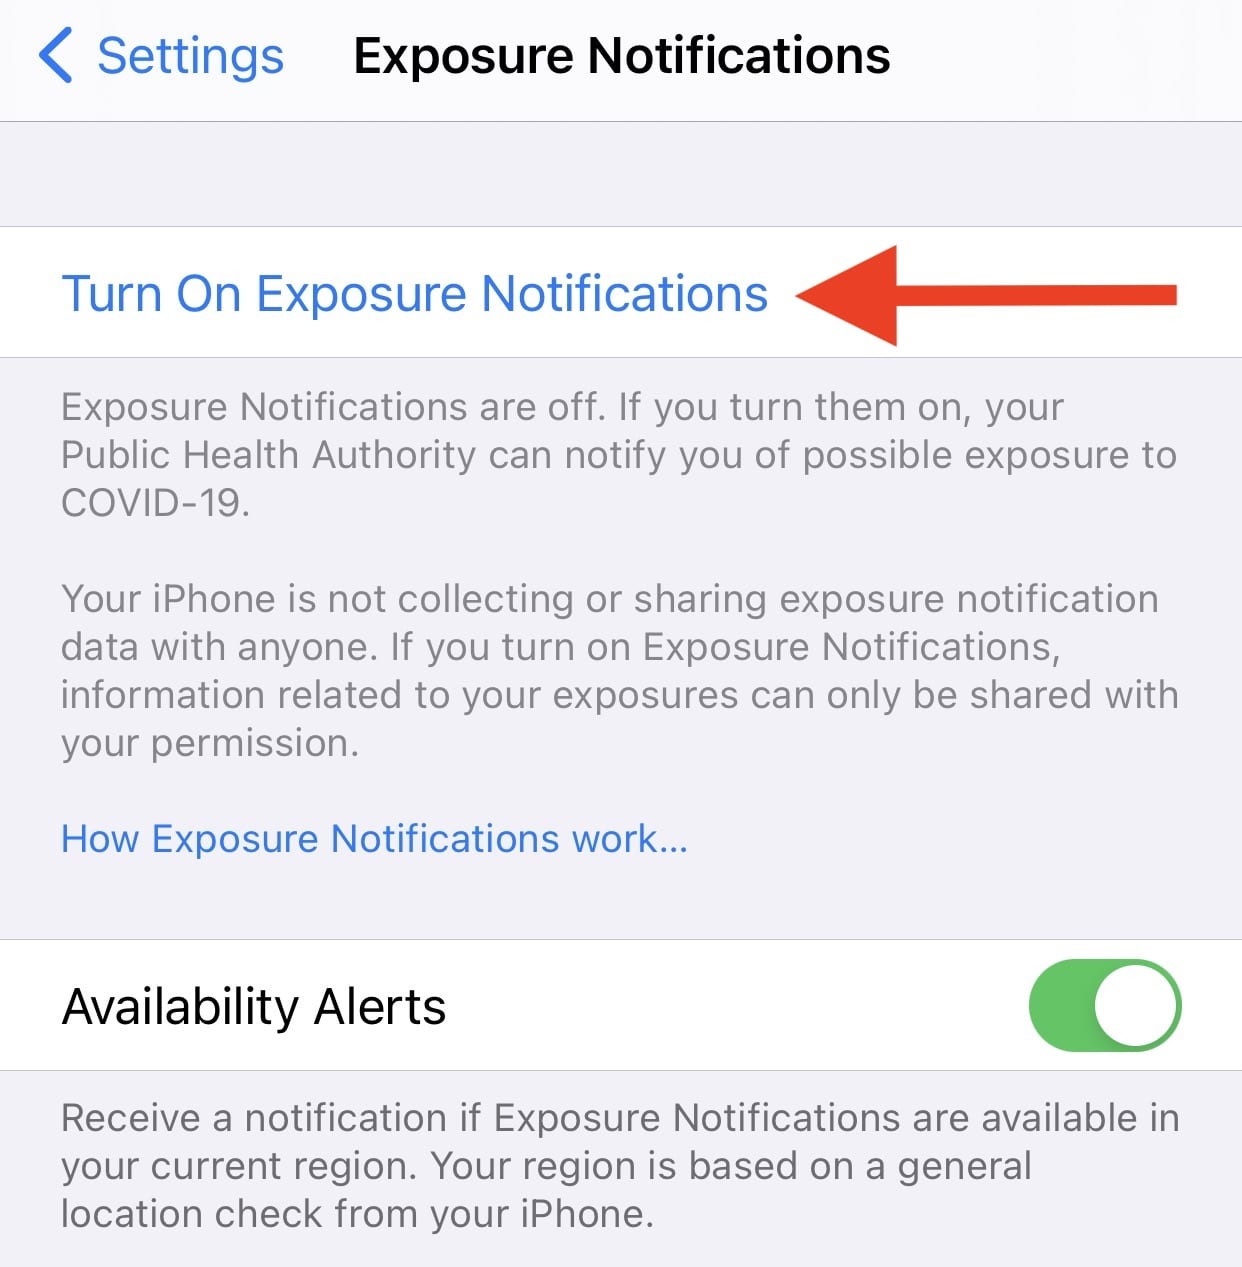 Turning on Exposure Notifications or Availability Alerts